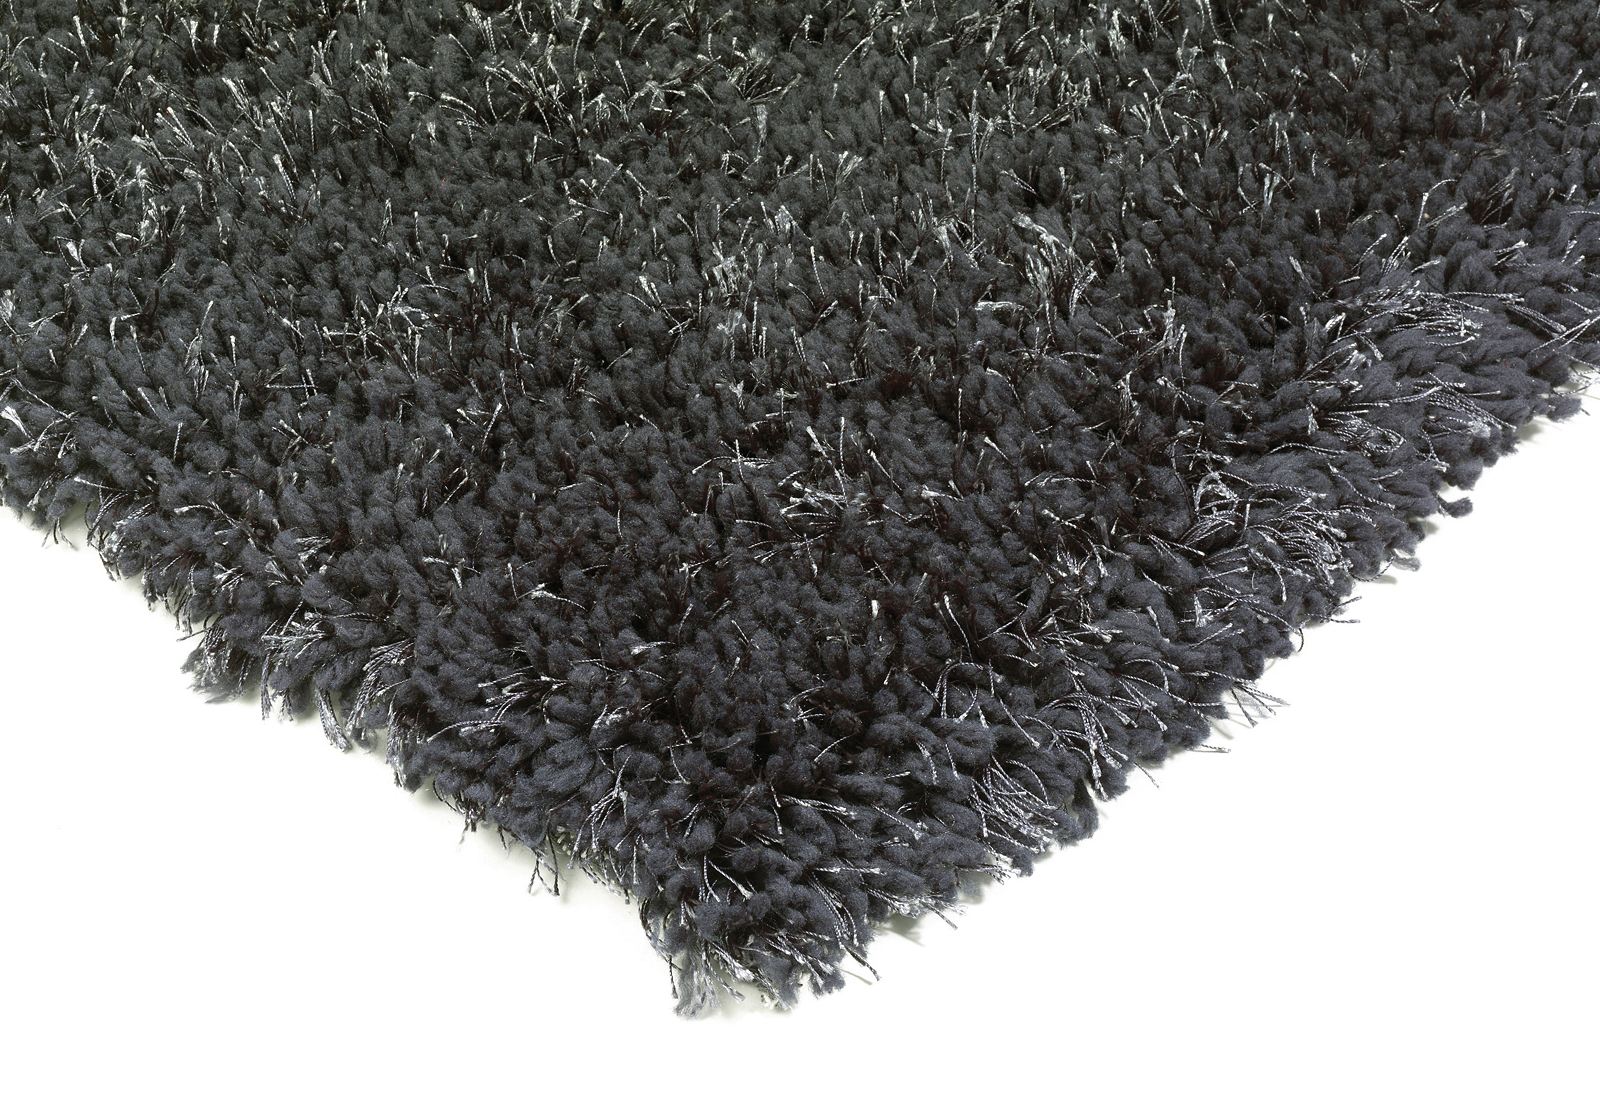 Diva Soft Touch Shaggy Rug - Charcoal